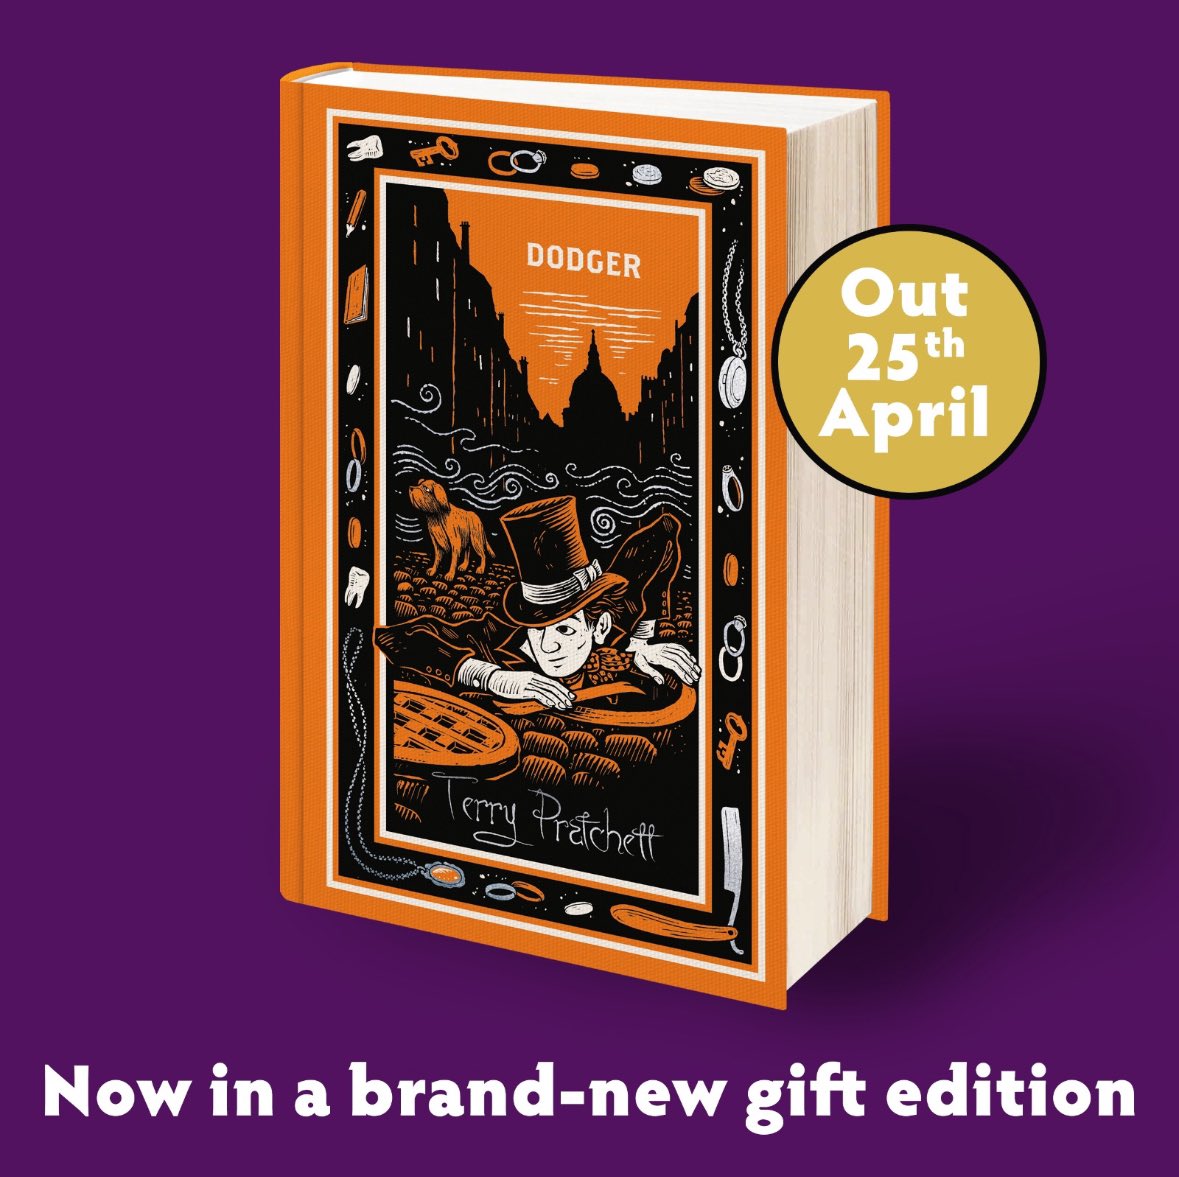 We’re delighted to reveal the new special edition cover for Dodger, featuring beautiful artwork from @JoeMcLaren, which will publish on the 25th of April from @PuffinBooks.